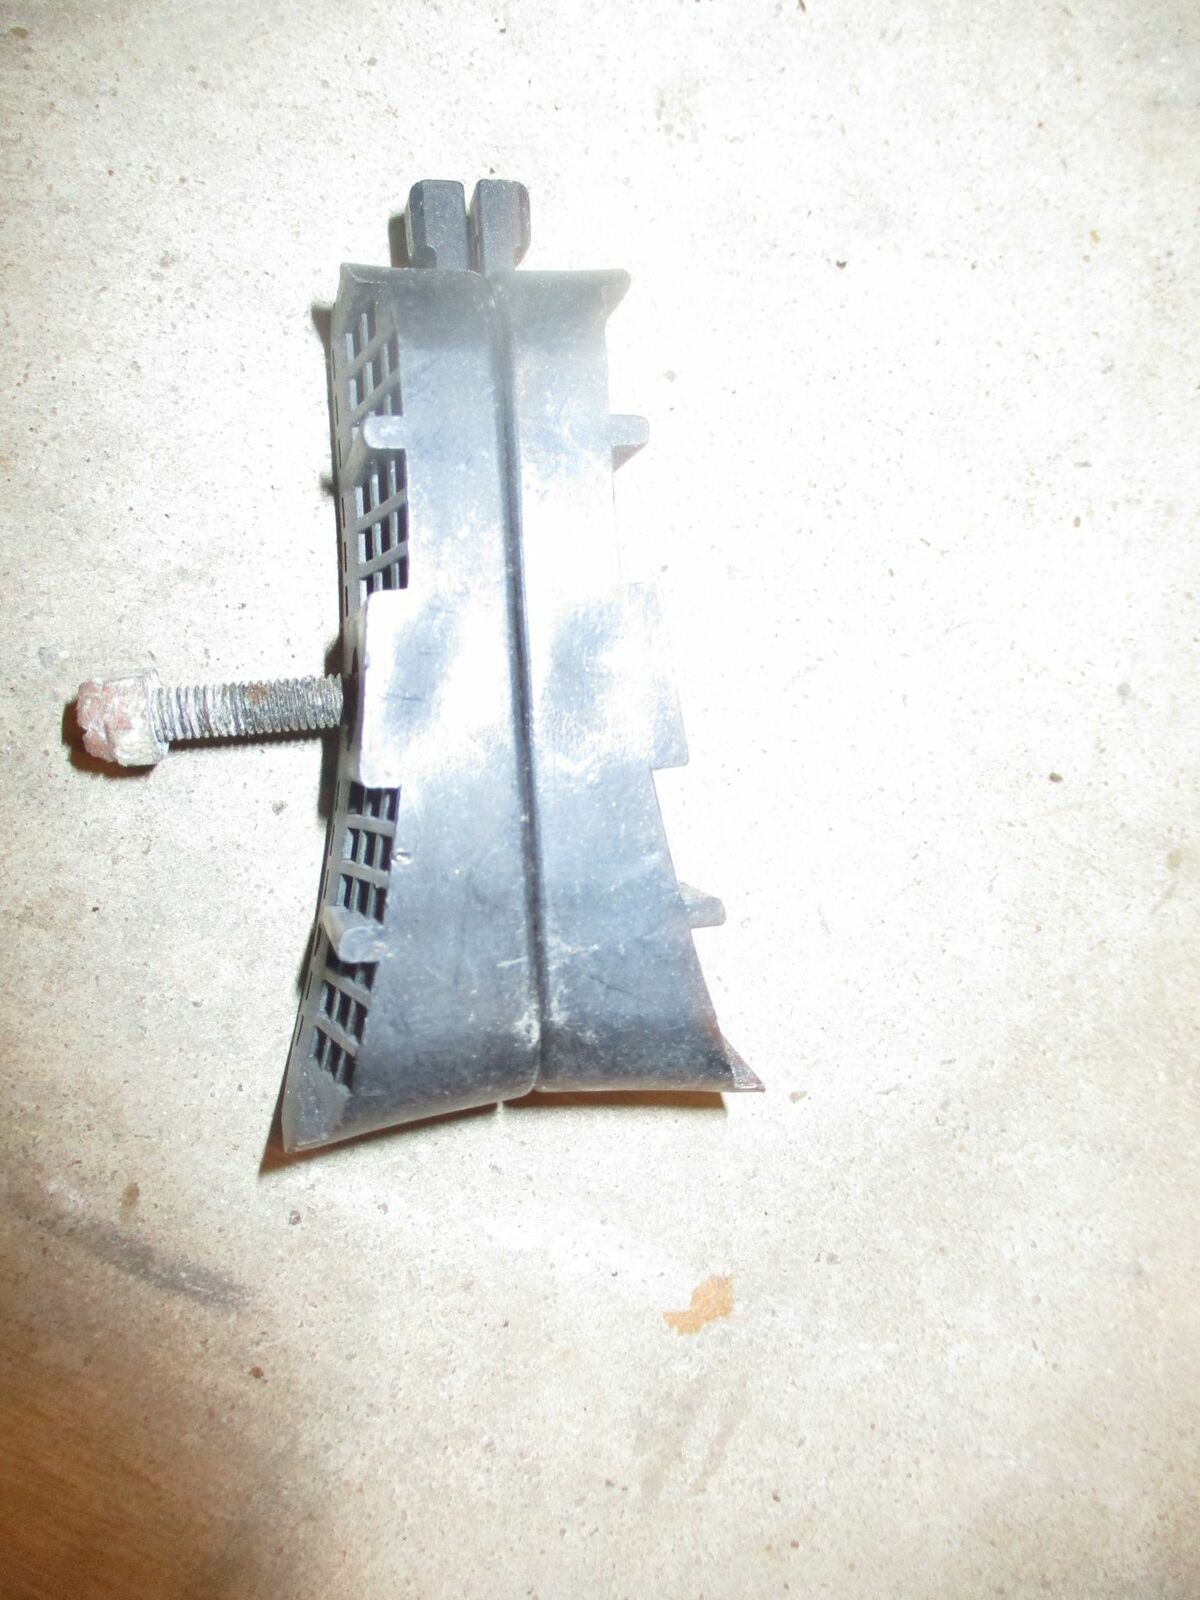 Yamaha outboard lower unit vent